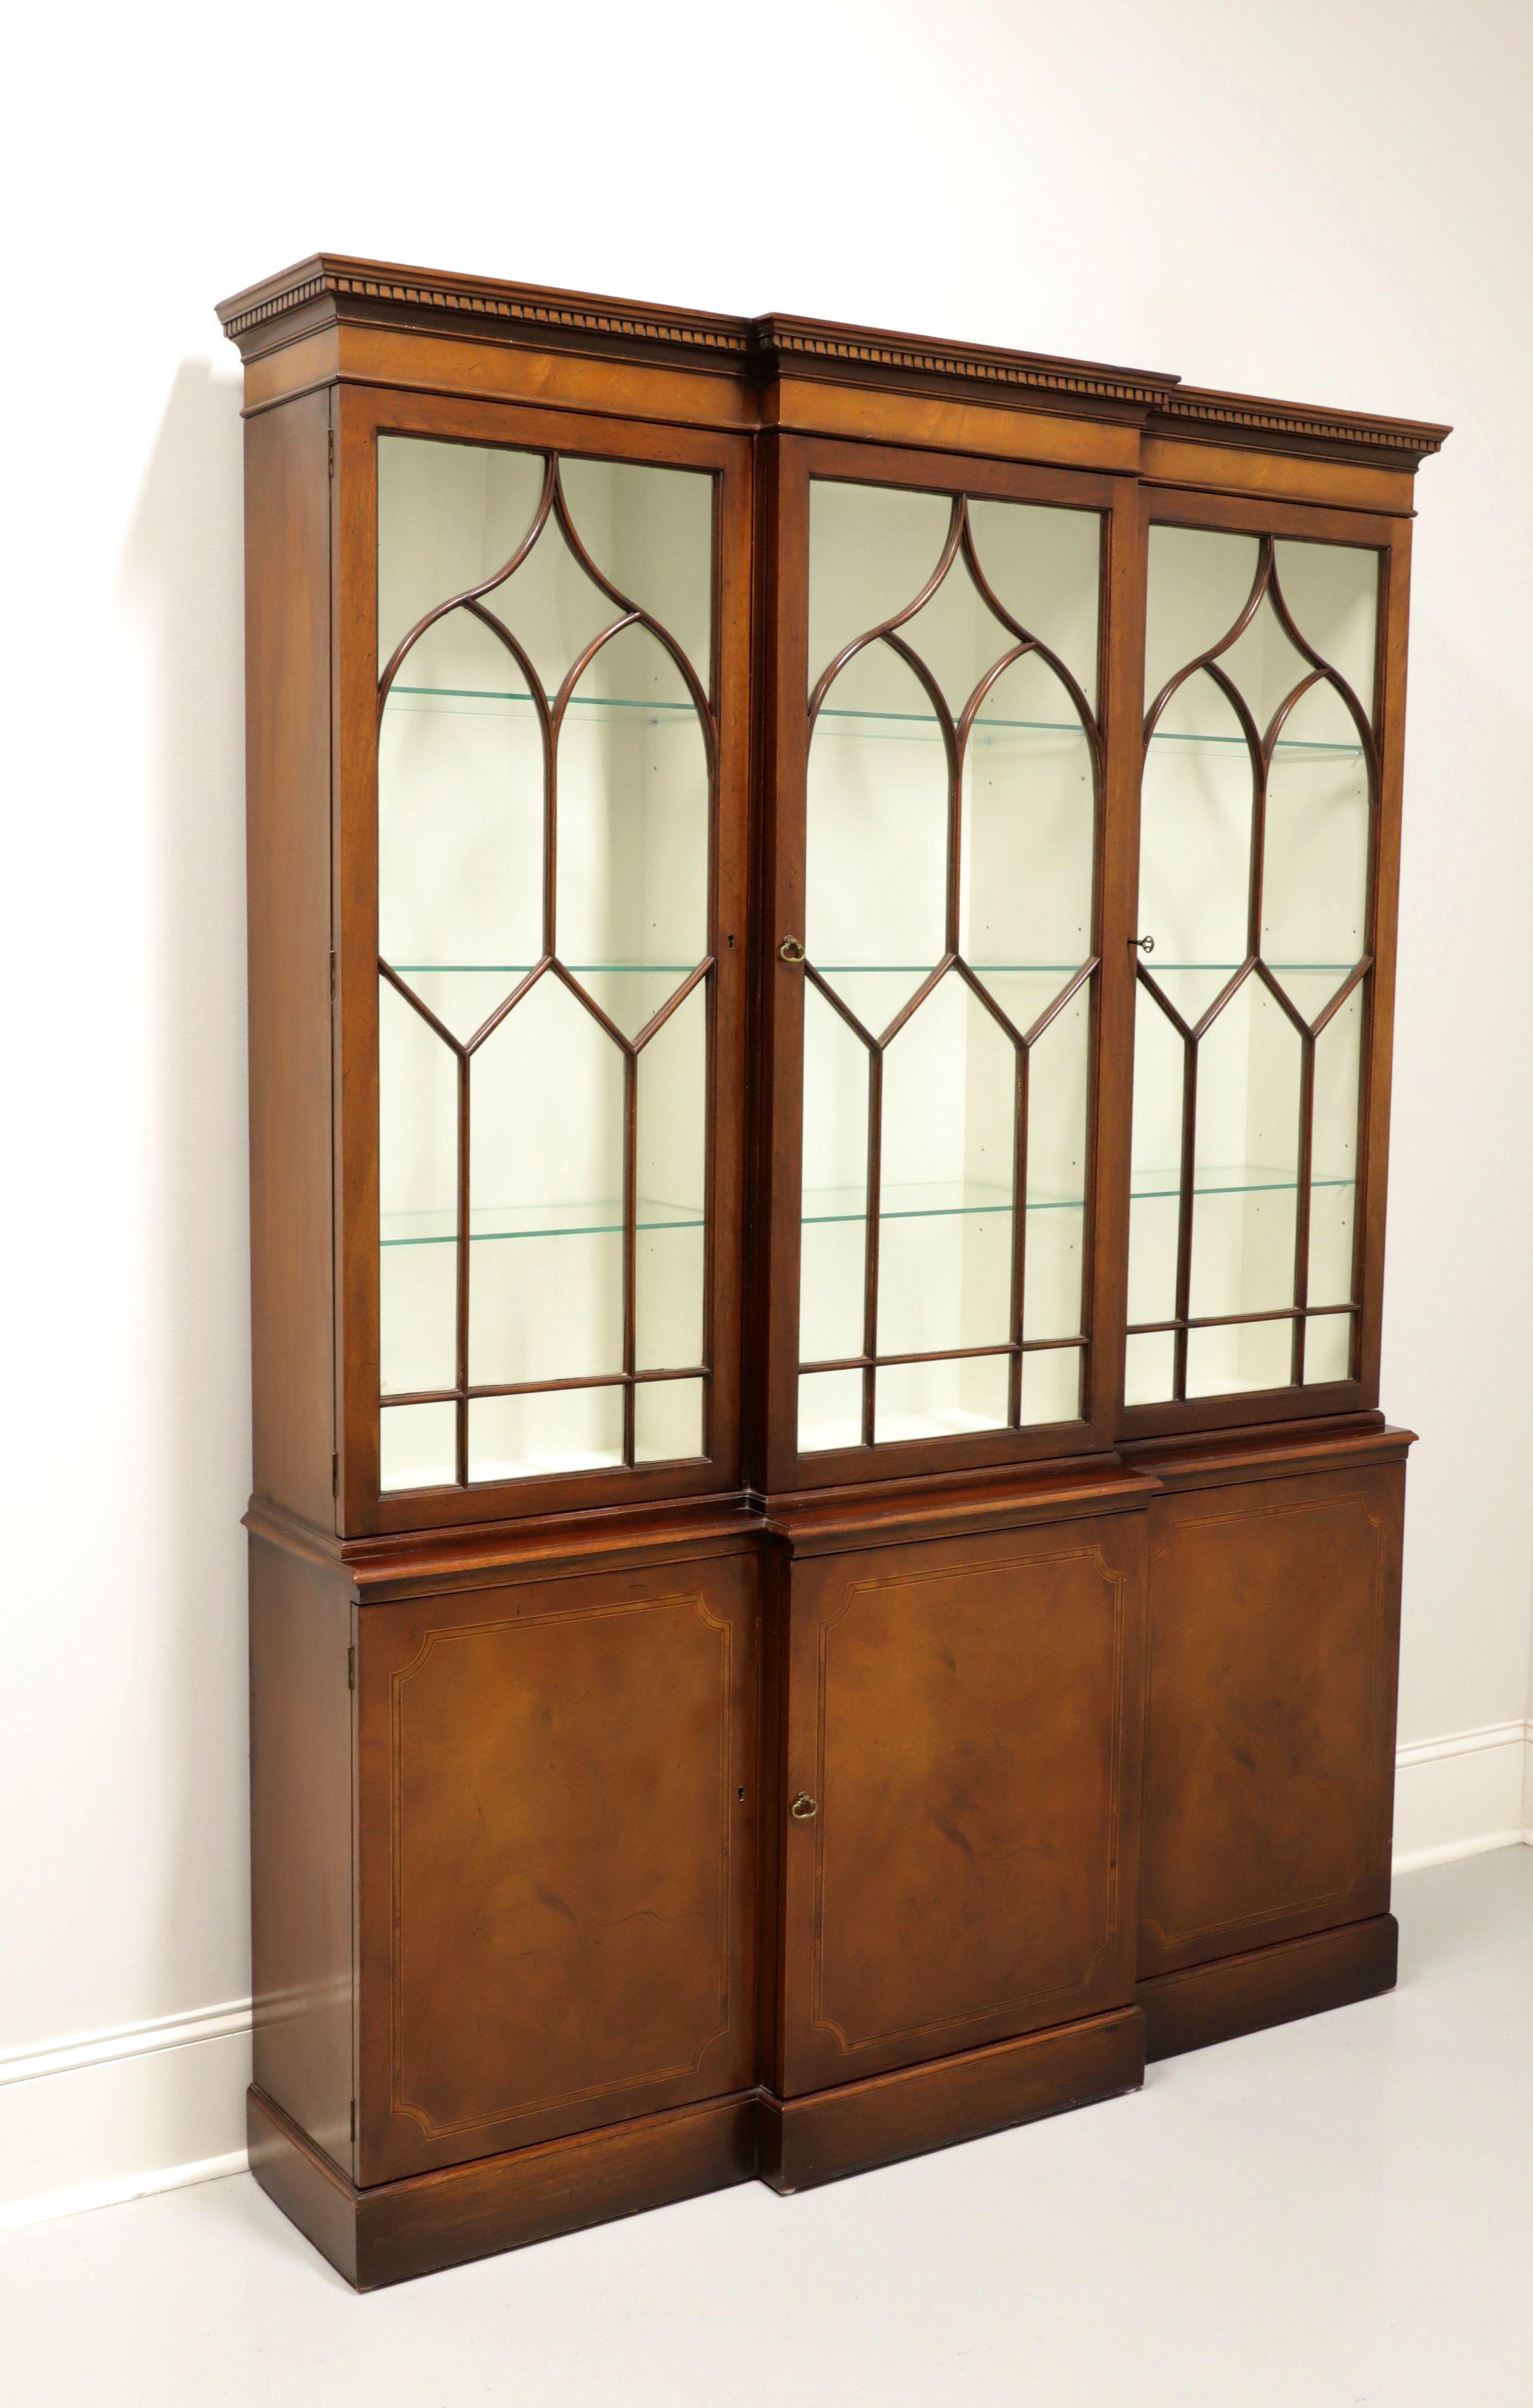 A Georgian style breakfront china cabinet by Baker Furniture. Mahogany with brass hardware, fretwork to glass doors, banded door fronts and crown & dentil molding to the top. Upper lighted cabinet features three compartments with three adjustable